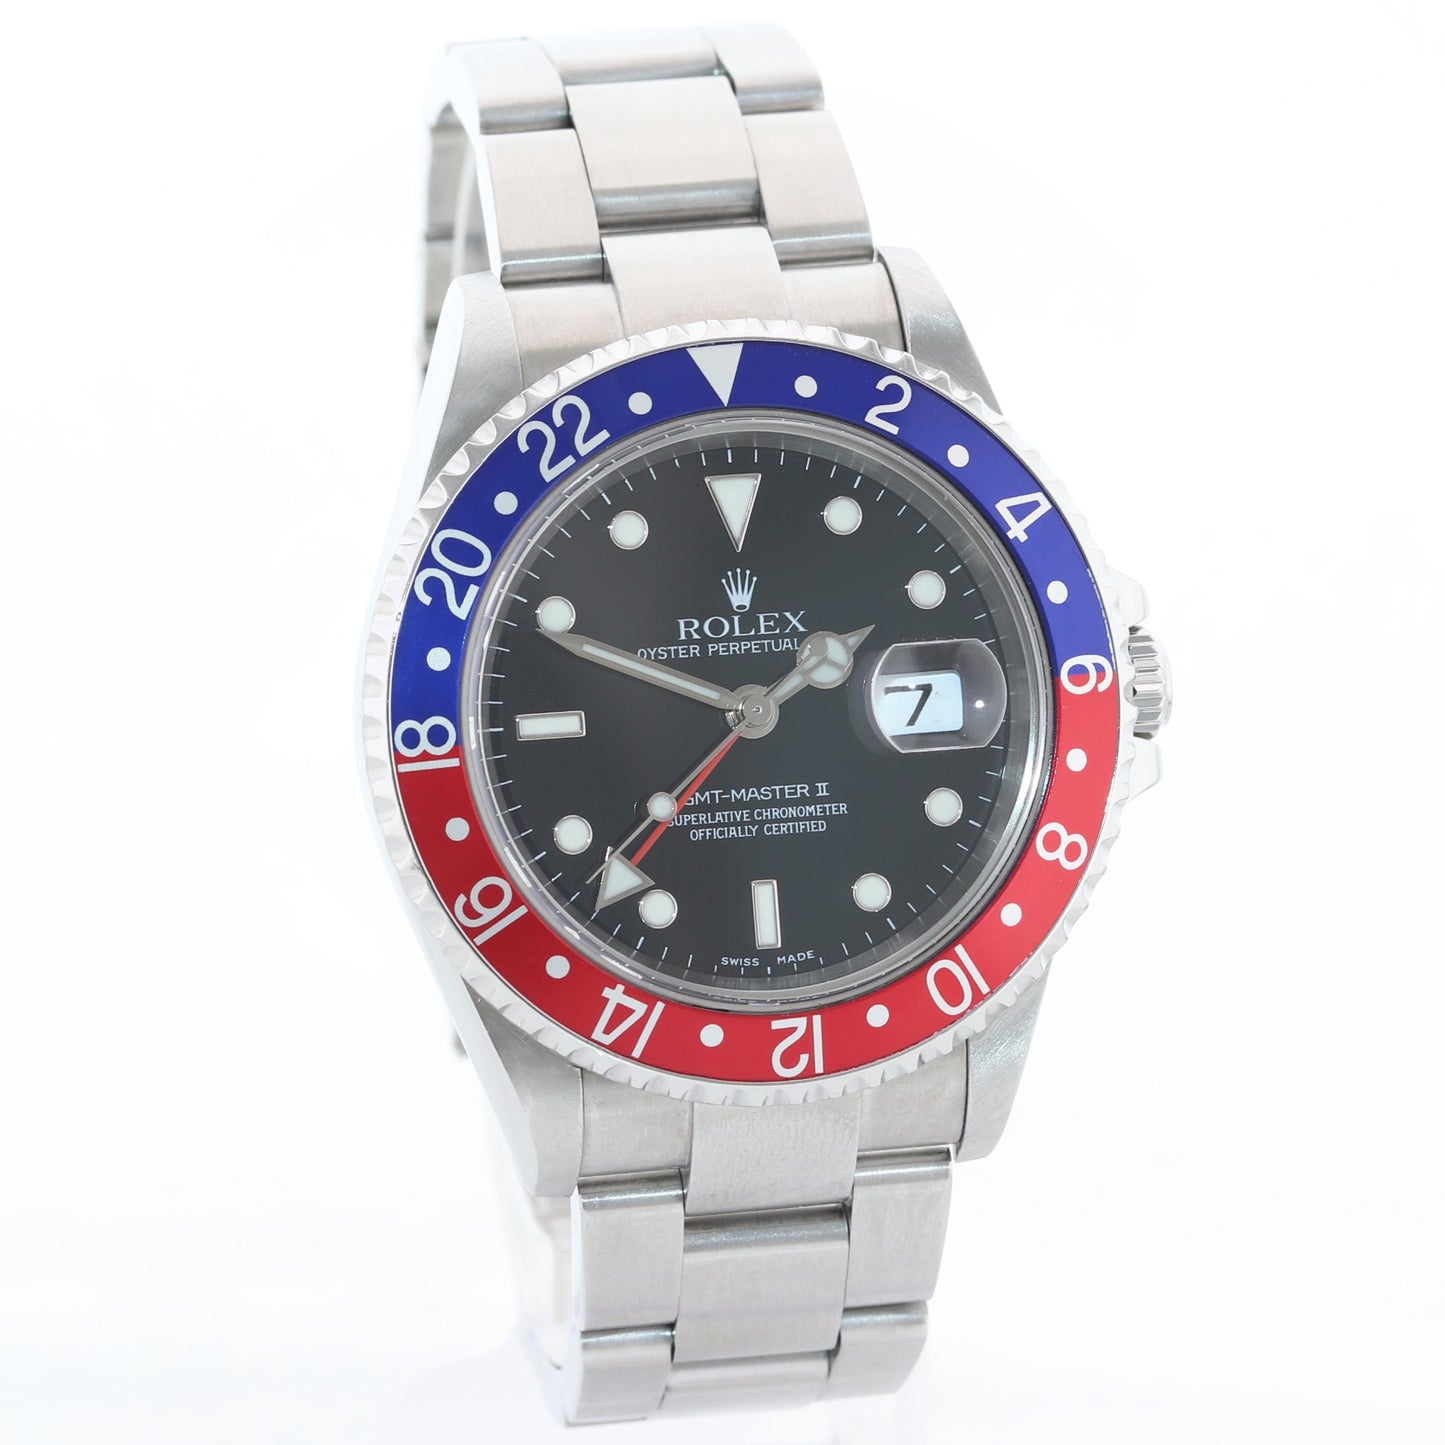 MINT 2004 PAPERS Rolex GMT-Master 2 Pepsi Blue Red Steel  BLRO 16710 40mm Watch